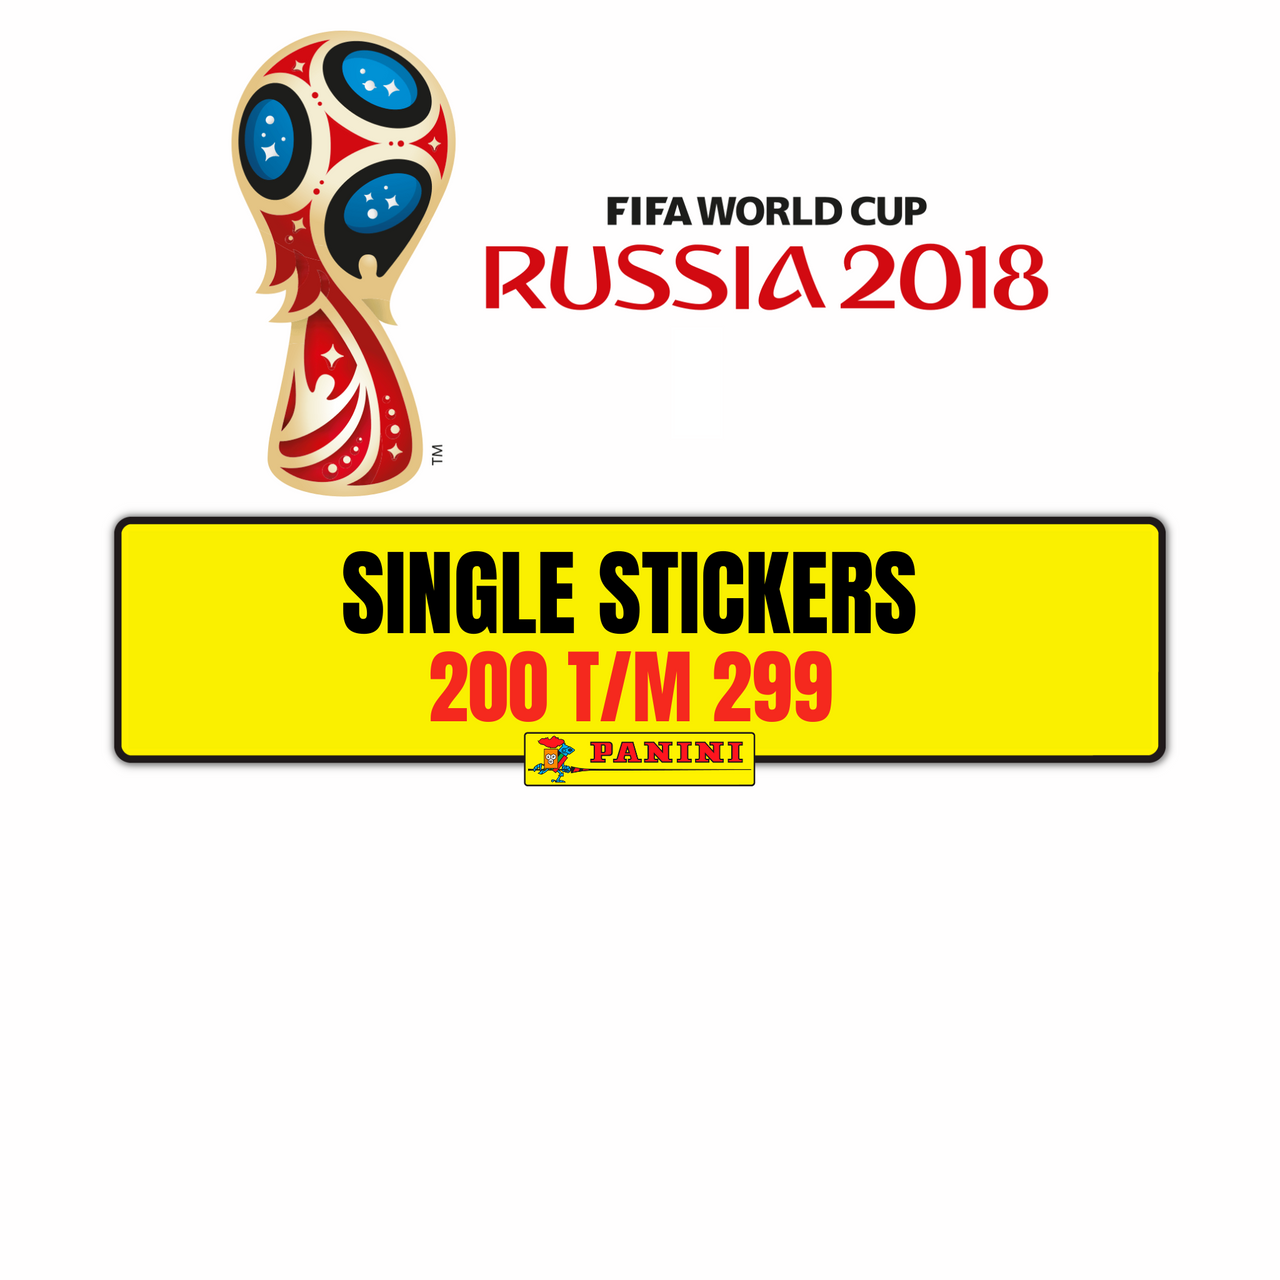 PANINI 2018 FIFA World Cup official sticker collection